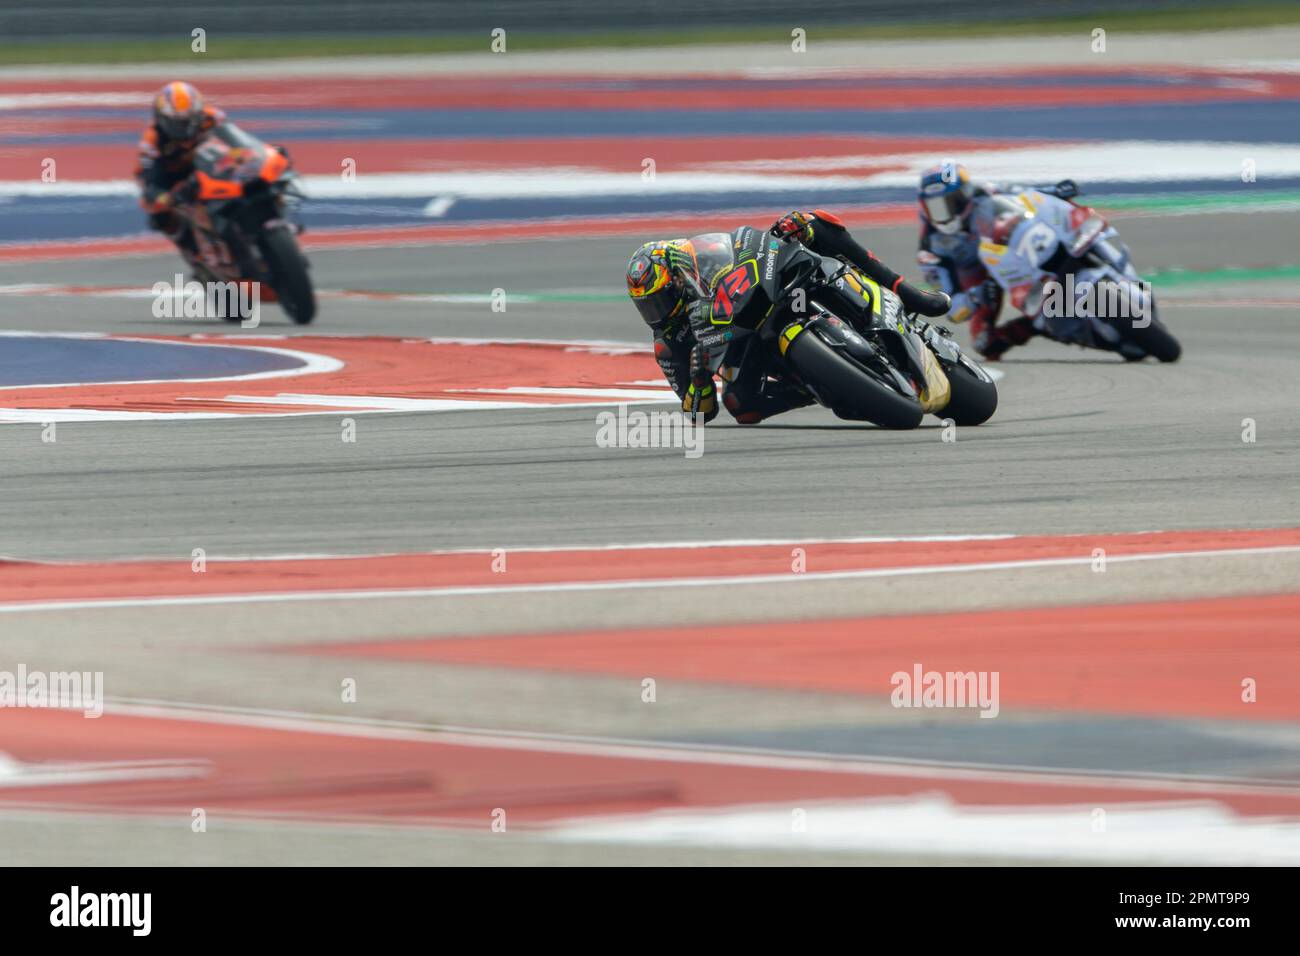 AUSTIN, TX - APRIL 14: Marco Bezzecchi (72) of Italy and Mooney VR46 Racing  Team rides through the chicane with Alex Marquez (73) of Gresini Racing  MotoGP following close behind during Free